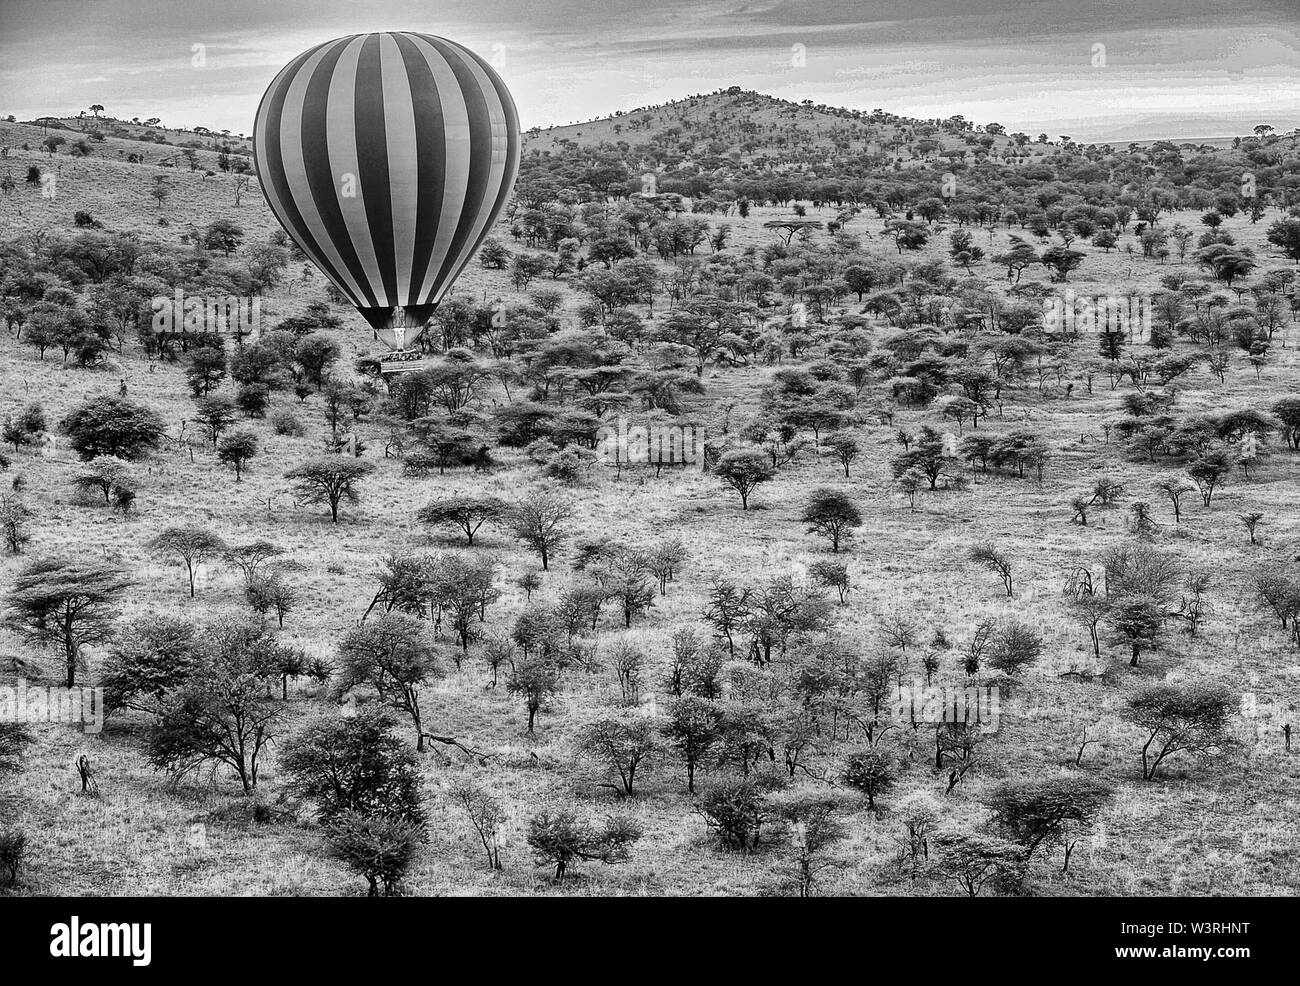 Views of the Serengeti Park from a hot air balloon aerial ride including migrations of wildebeest shot in June, 2019 Stock Photo